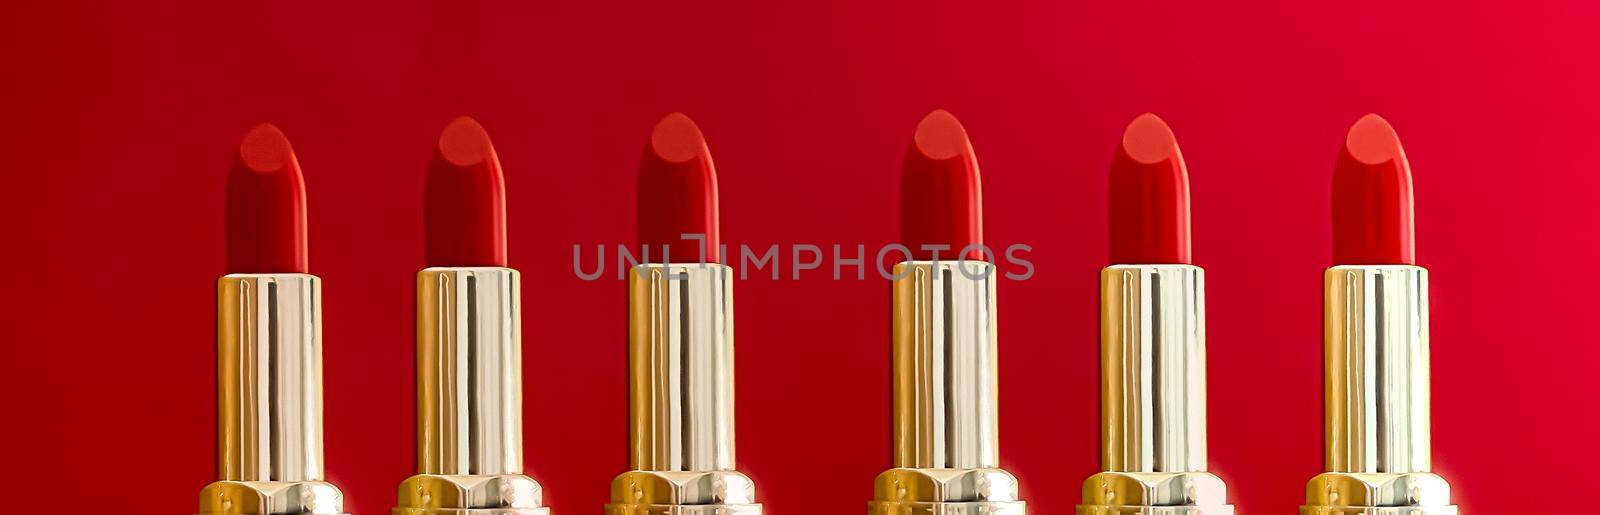 Red lipstick in golden tubes on colour background, luxury make-up and cosmetics for beauty brand product design concept